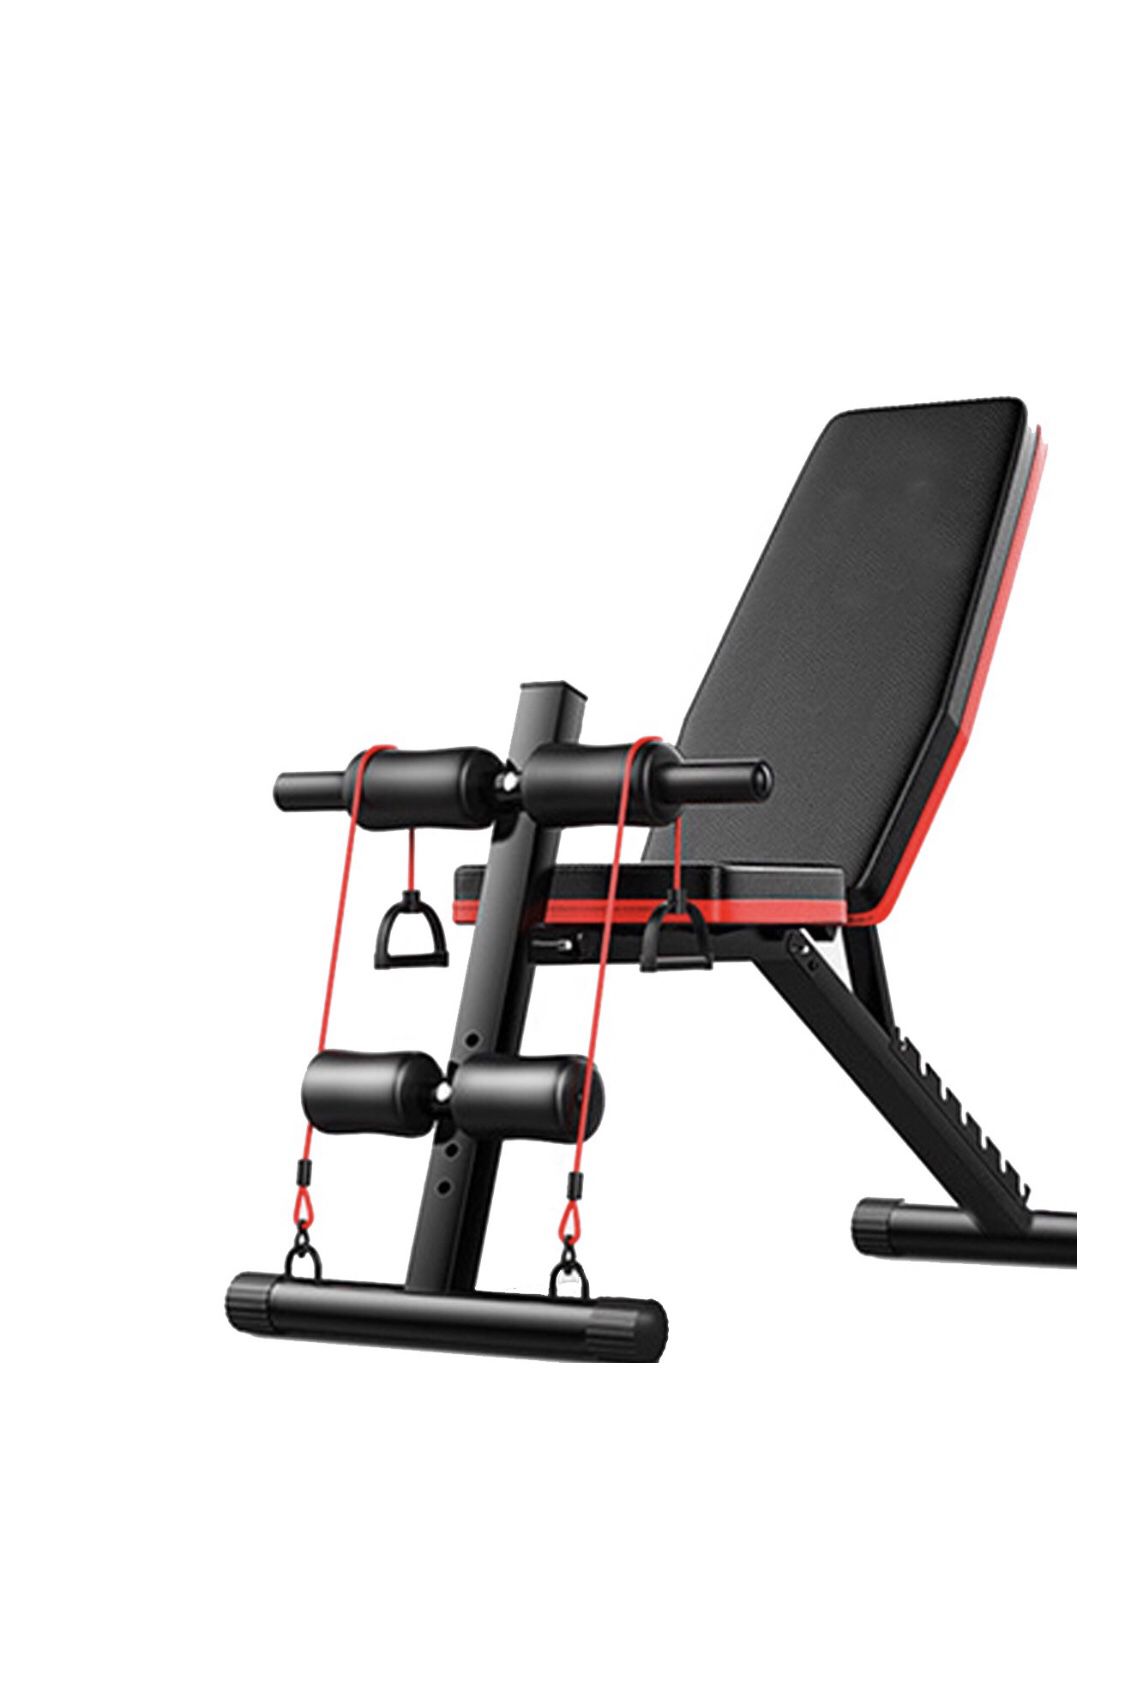 Adjustable Weight Bench w/ Auxiliary Rope Puller,Foldable Sit Up Bench Trainer Supine Board